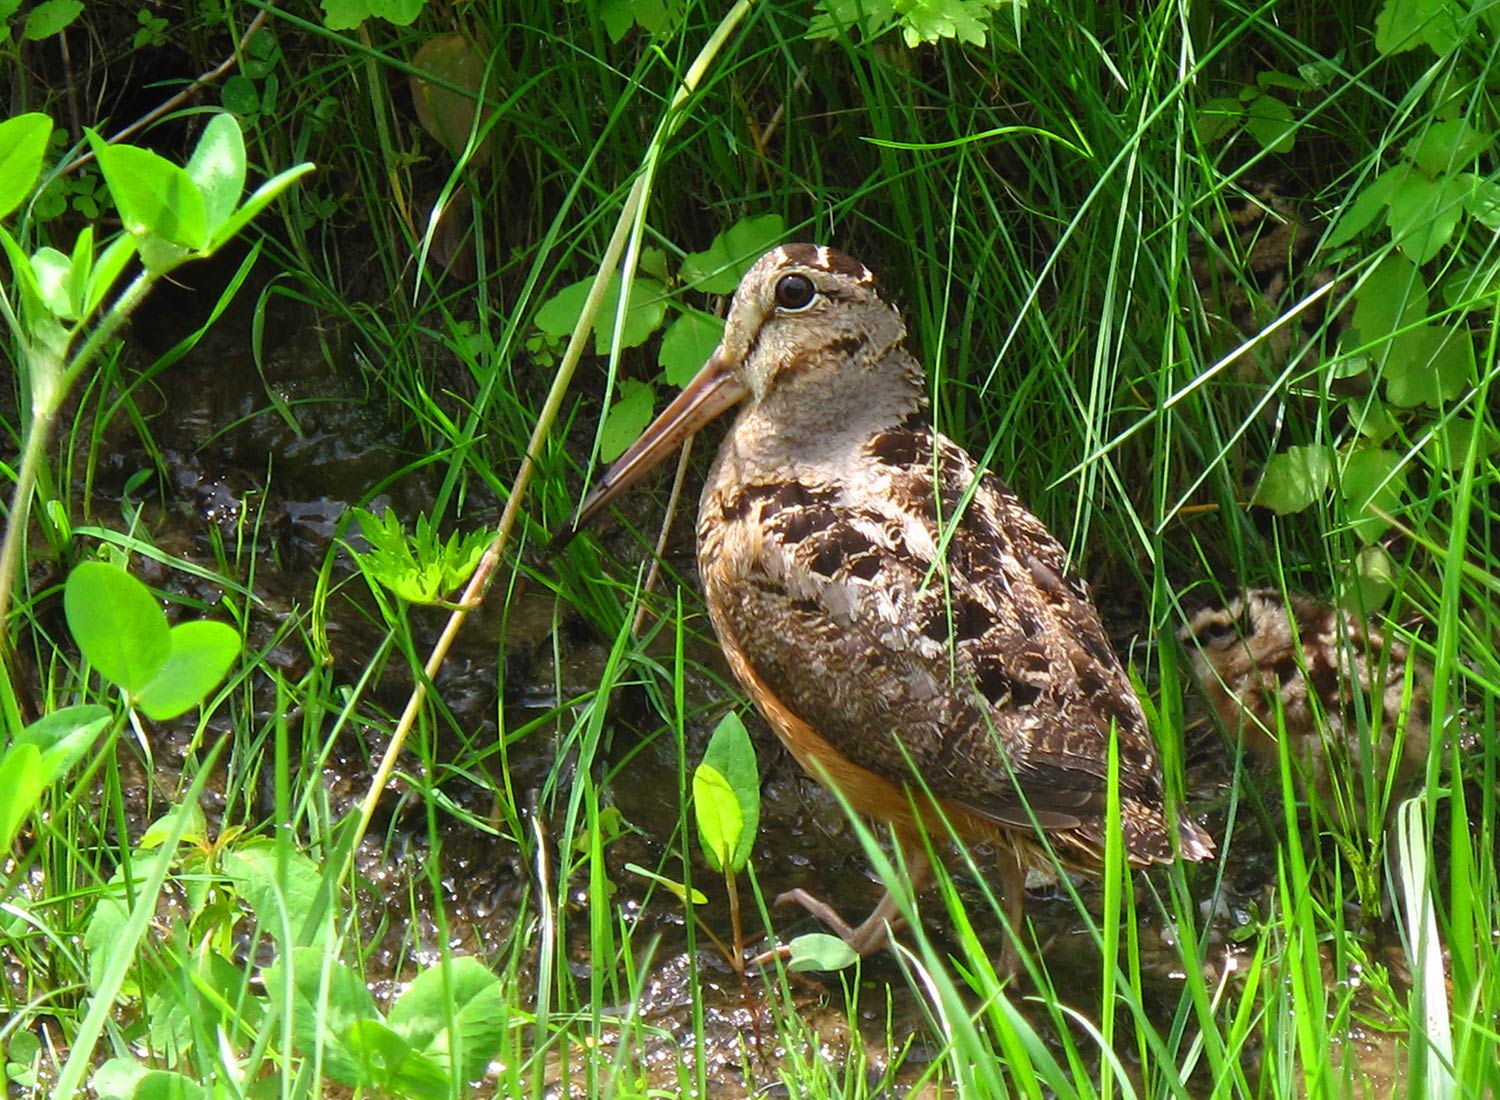 Photo © Susan C. Morse, SHO Farm's wildlife biologist | one of our land stewardship practices is to ensure safe & healthy habitat for wildlife like this woodcock and her chick